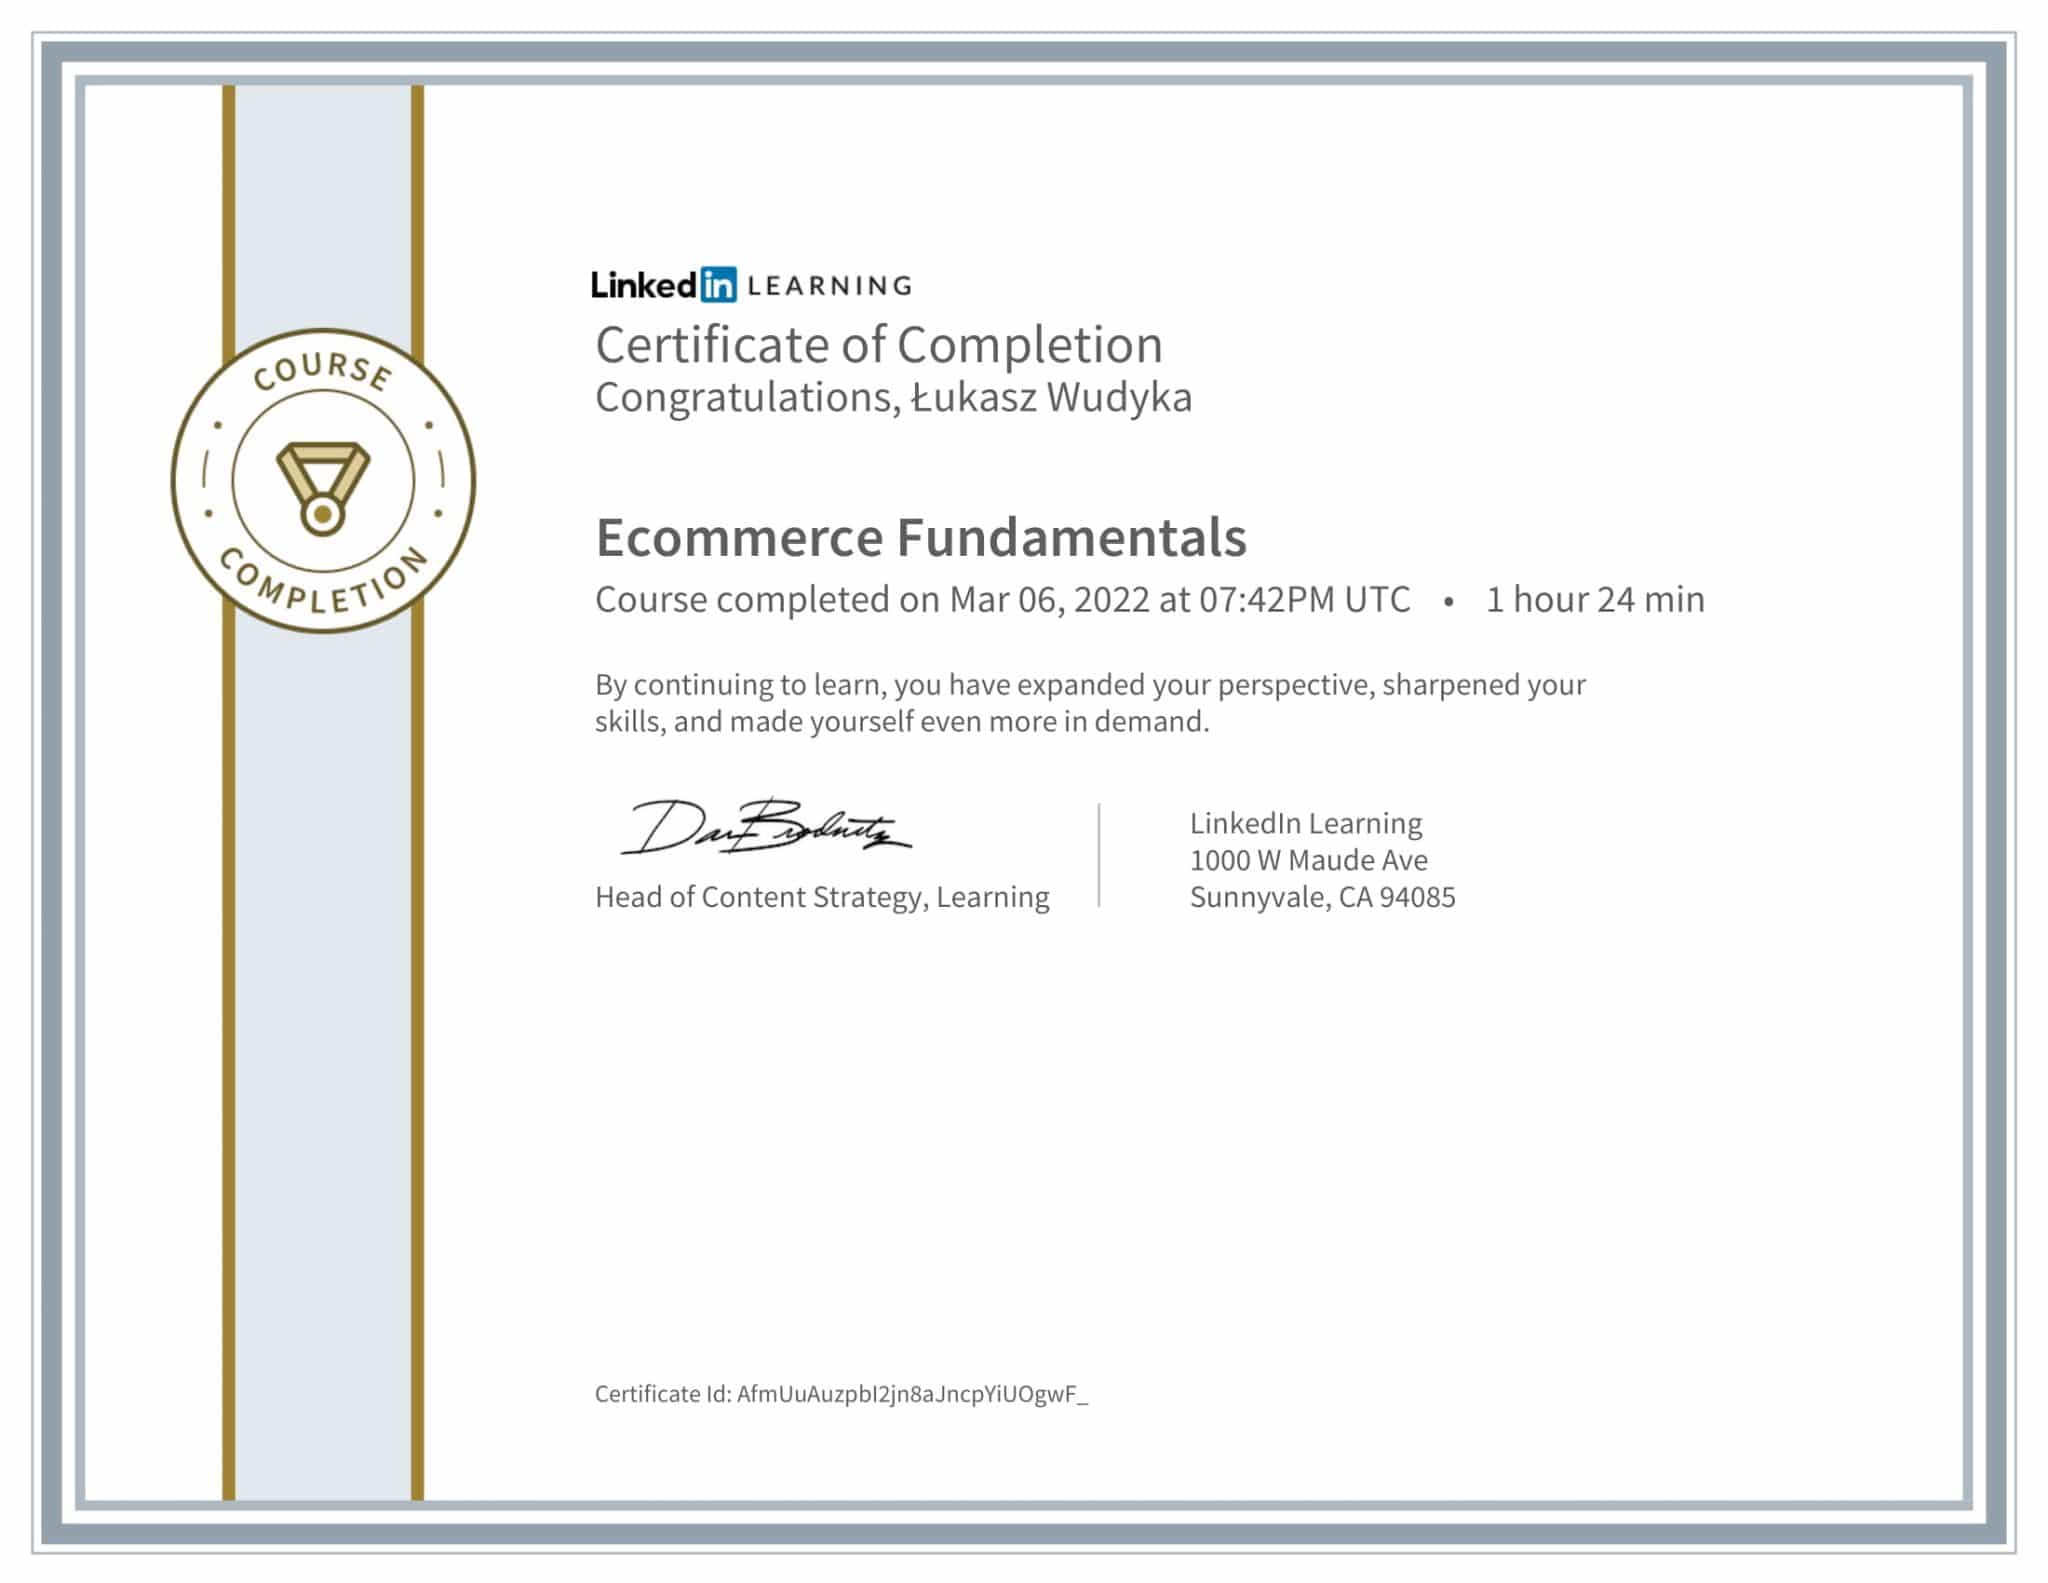 CertificateOfCompletion_Ecommerce Fundamentals-1